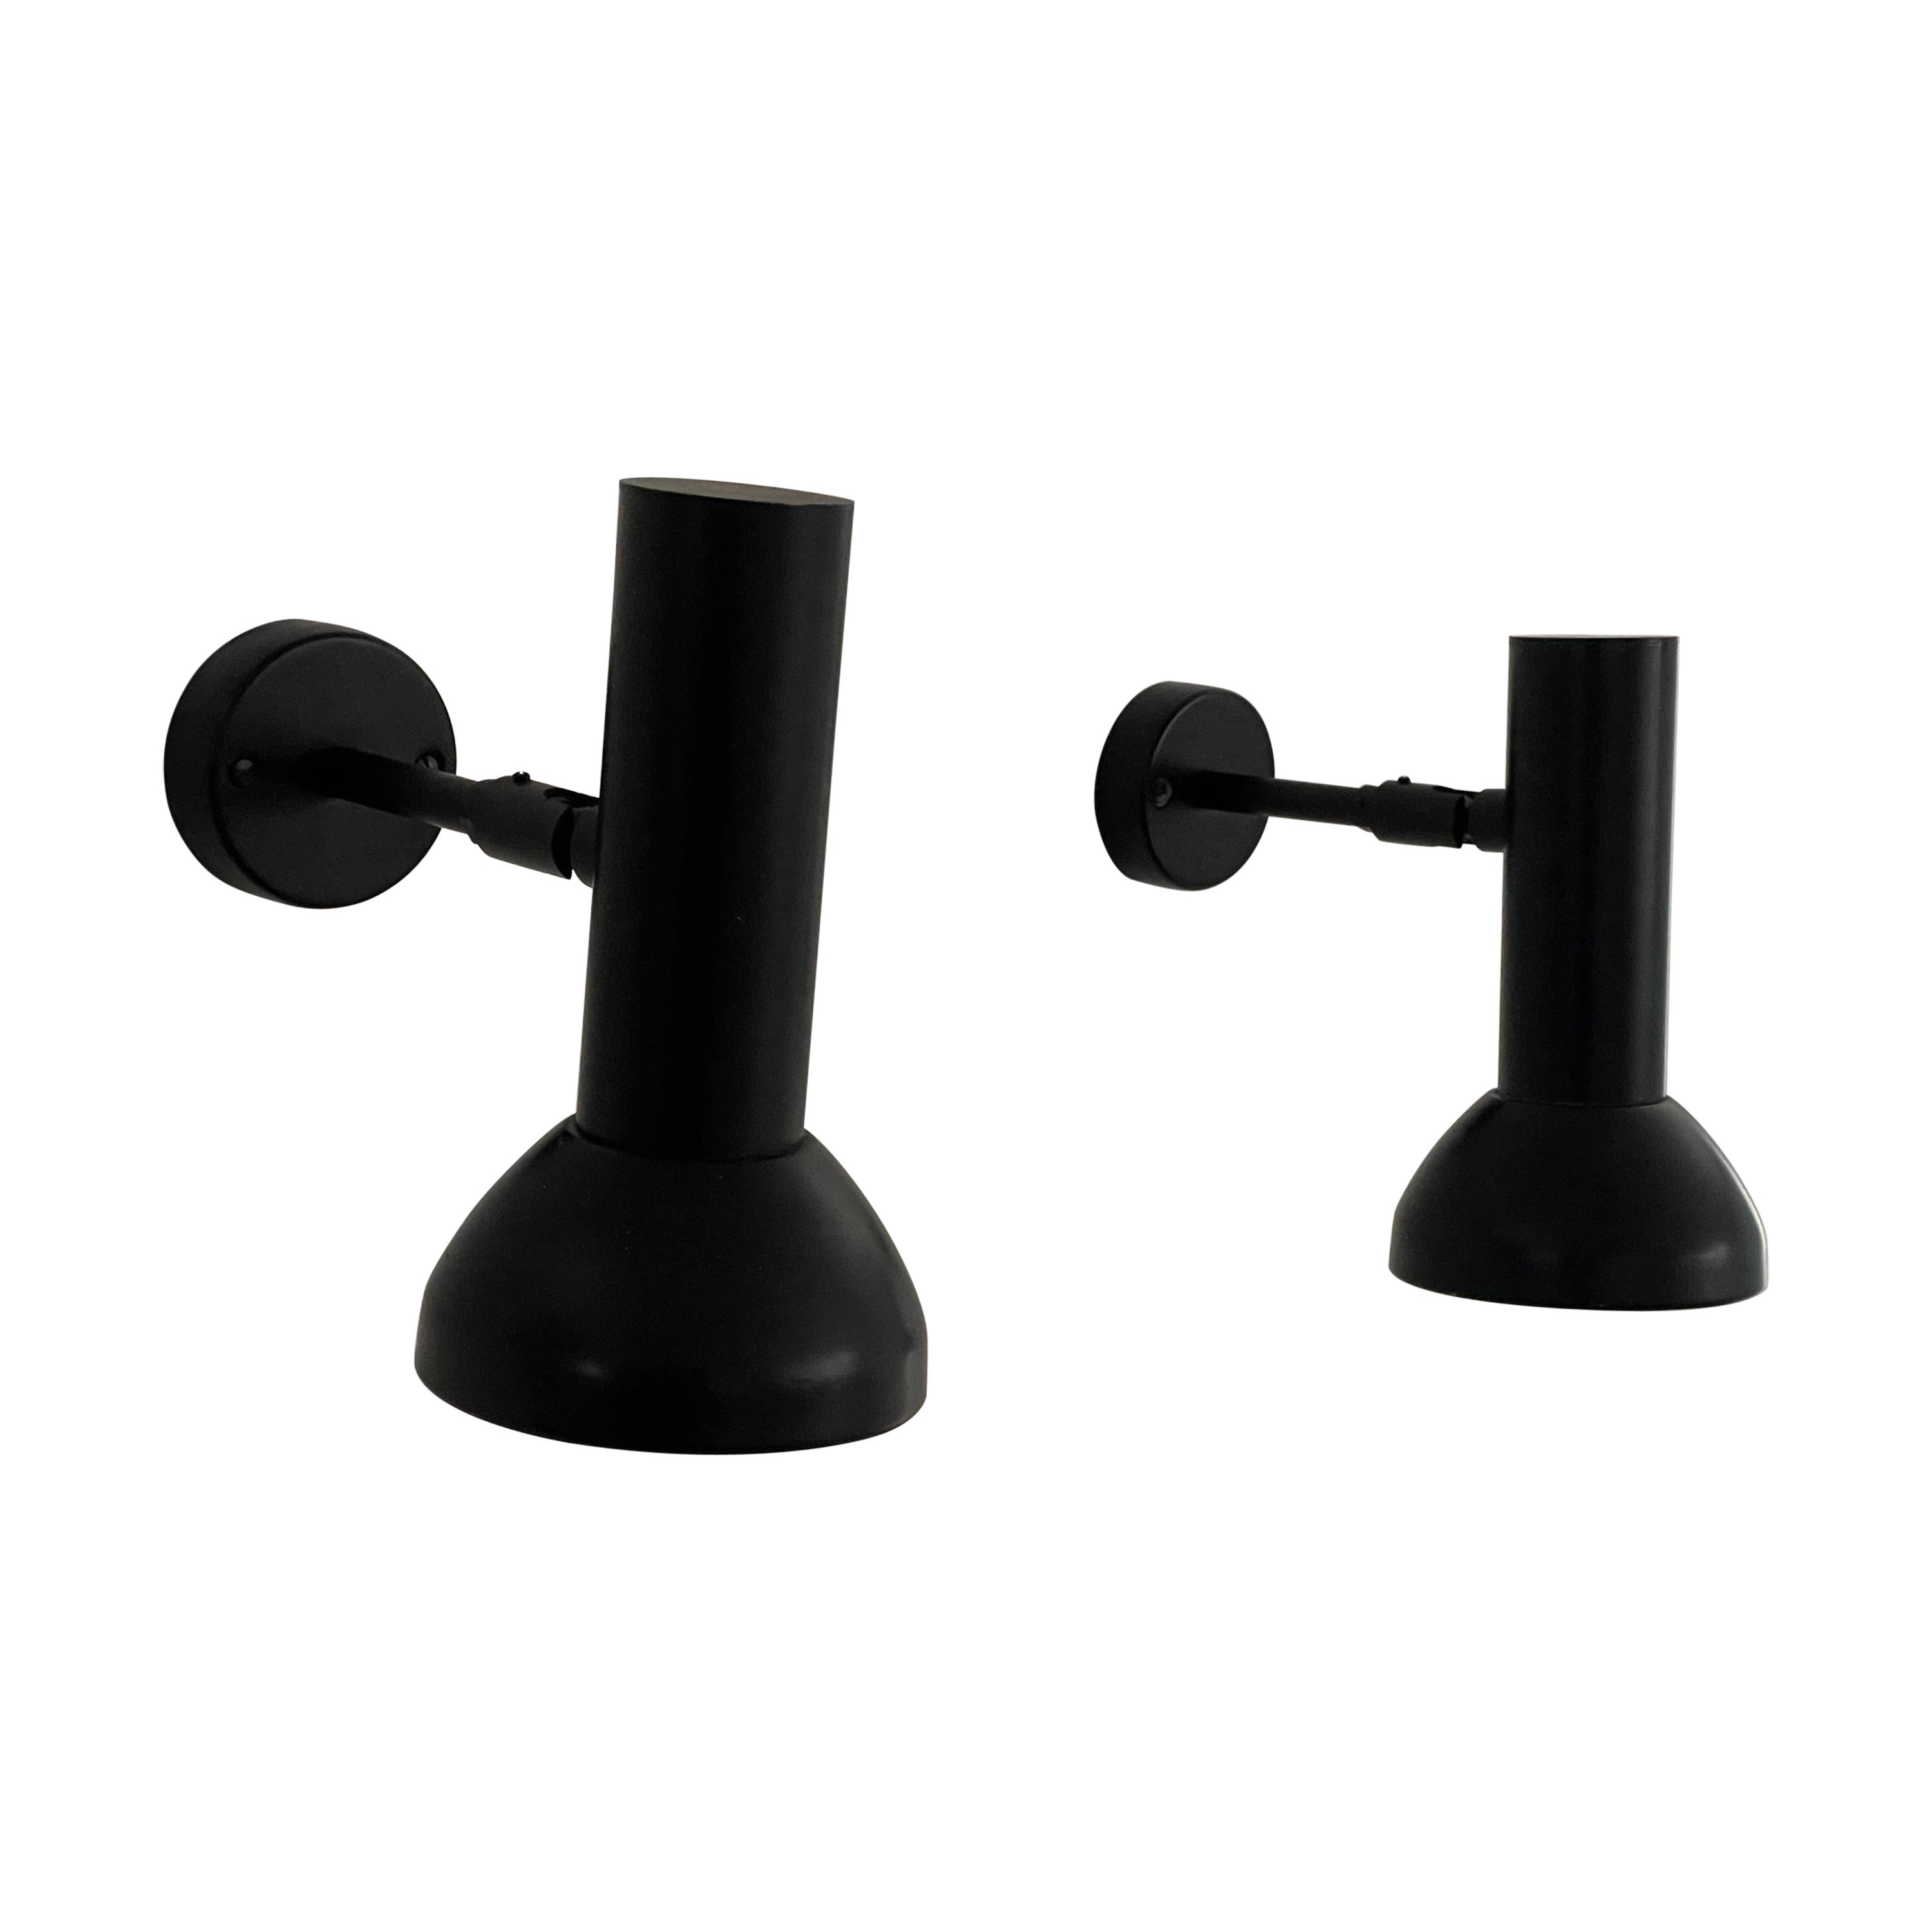 Mid-century Modern Black Pair of Sconces by Cosack Leuchten, 1960s, Germany For Sale